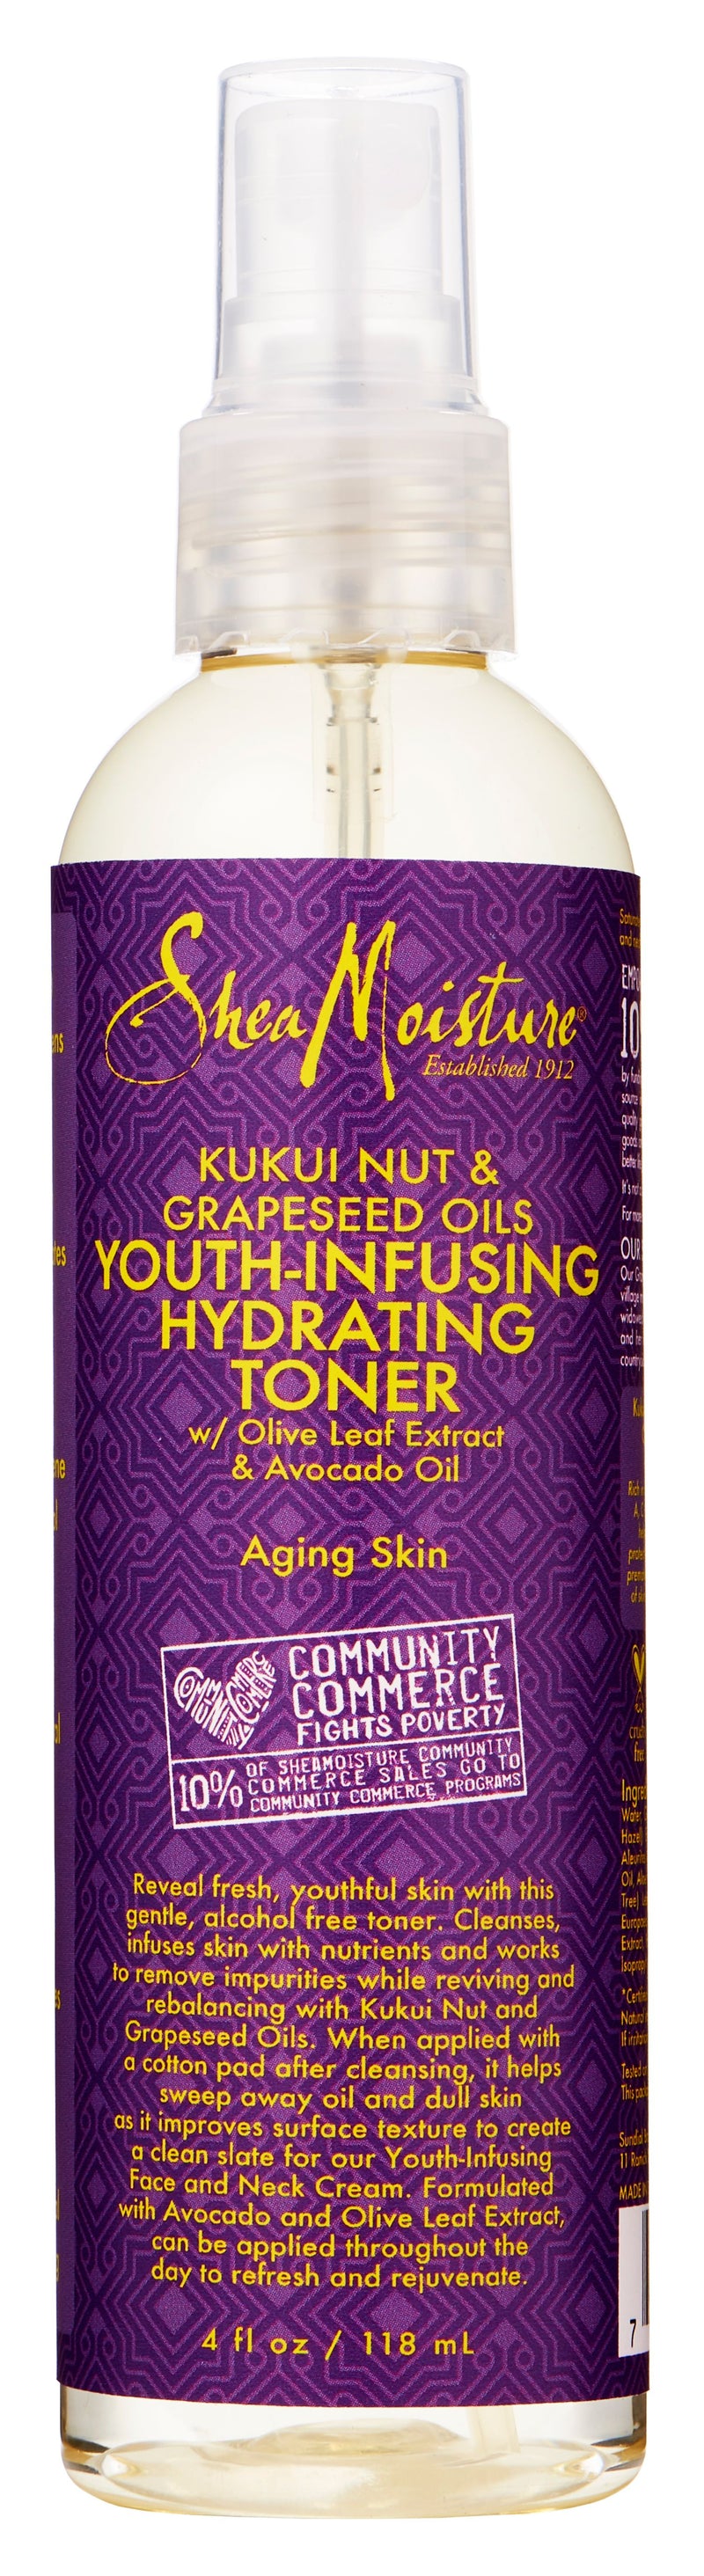 SheaMoisuture Kukui Nut & Grapeseed Oil Youth-Infusing Hydrating Facial Toner, 4 oz